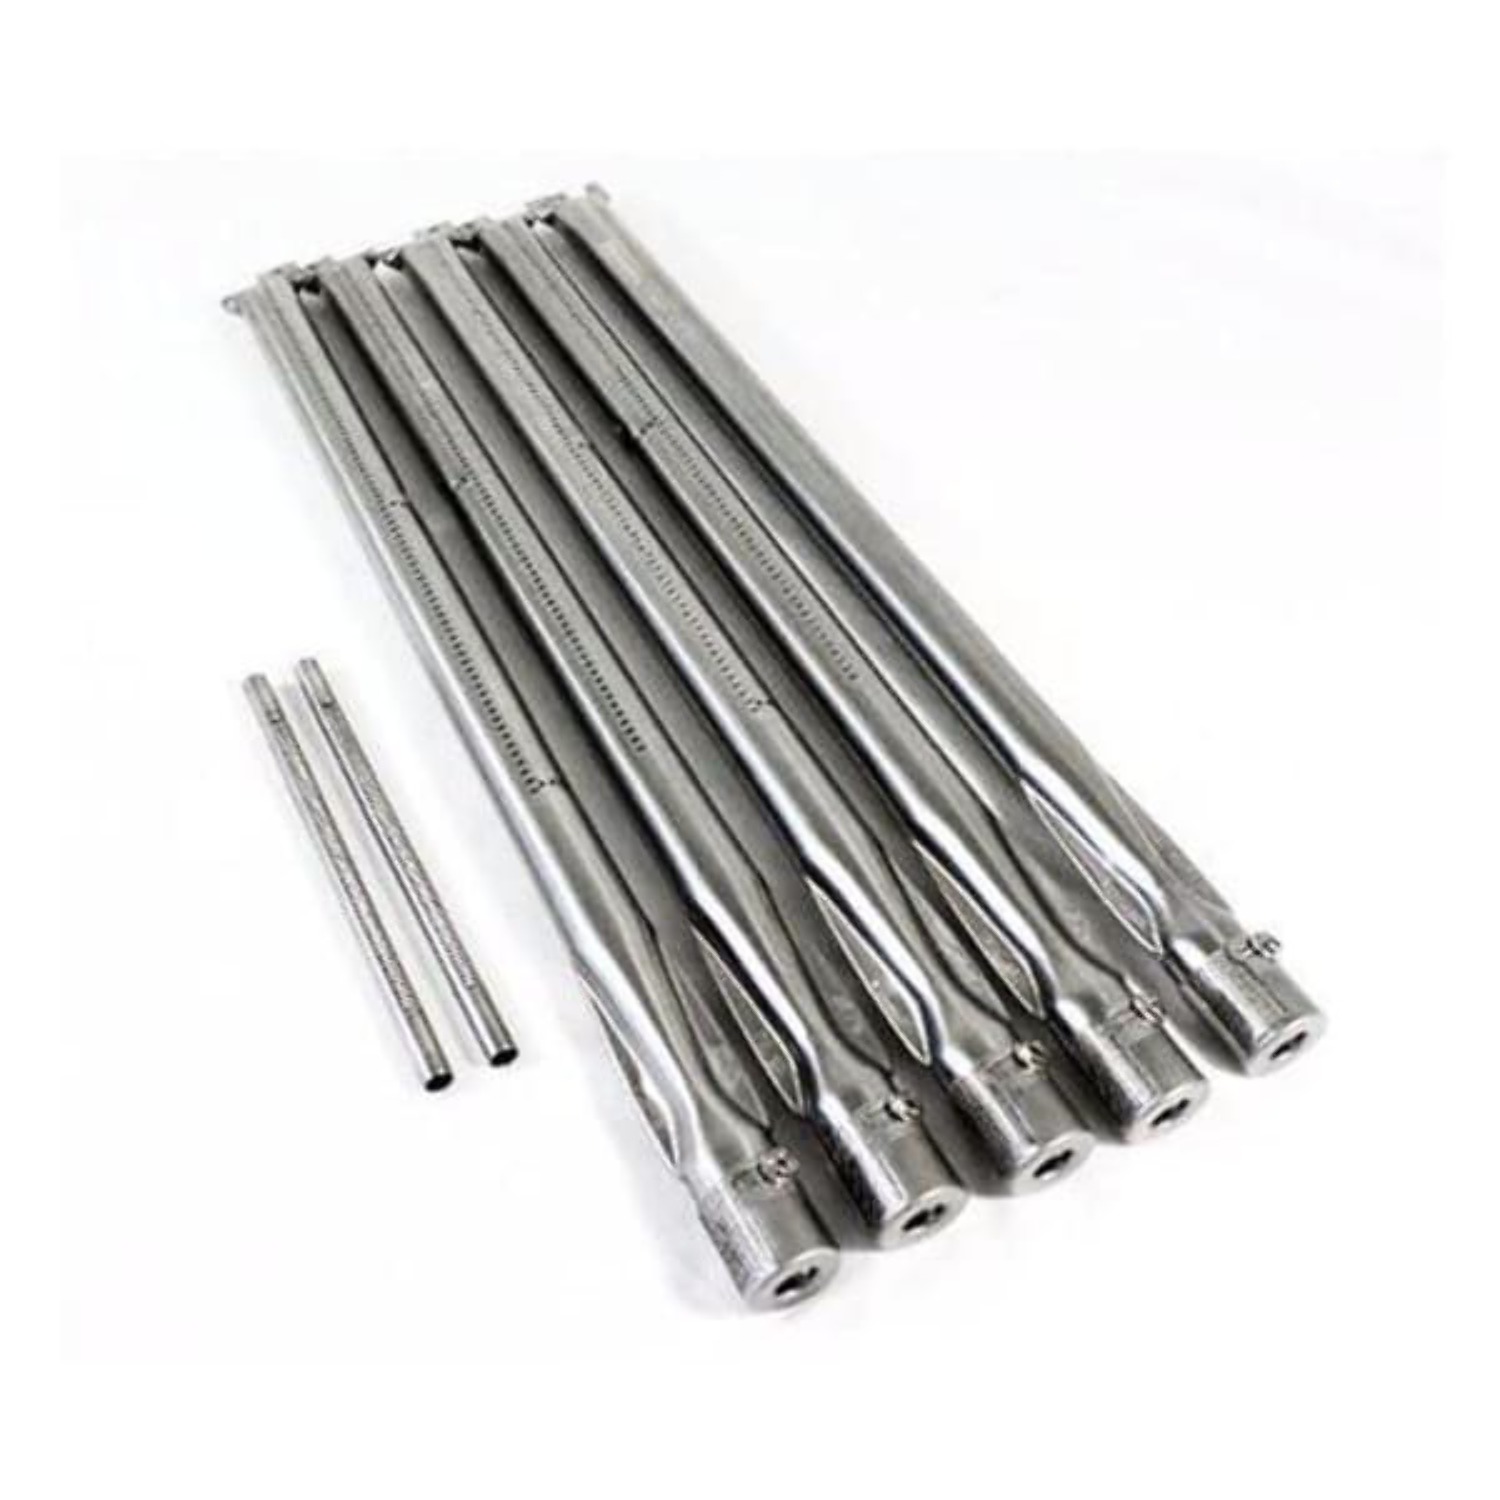 BBQ Grill Compatible With Weber Grills 5-Pack SS Burner  Smoker Set (Plus 2 Crossover Burner Tubes) BCP85661 - image 1 of 4